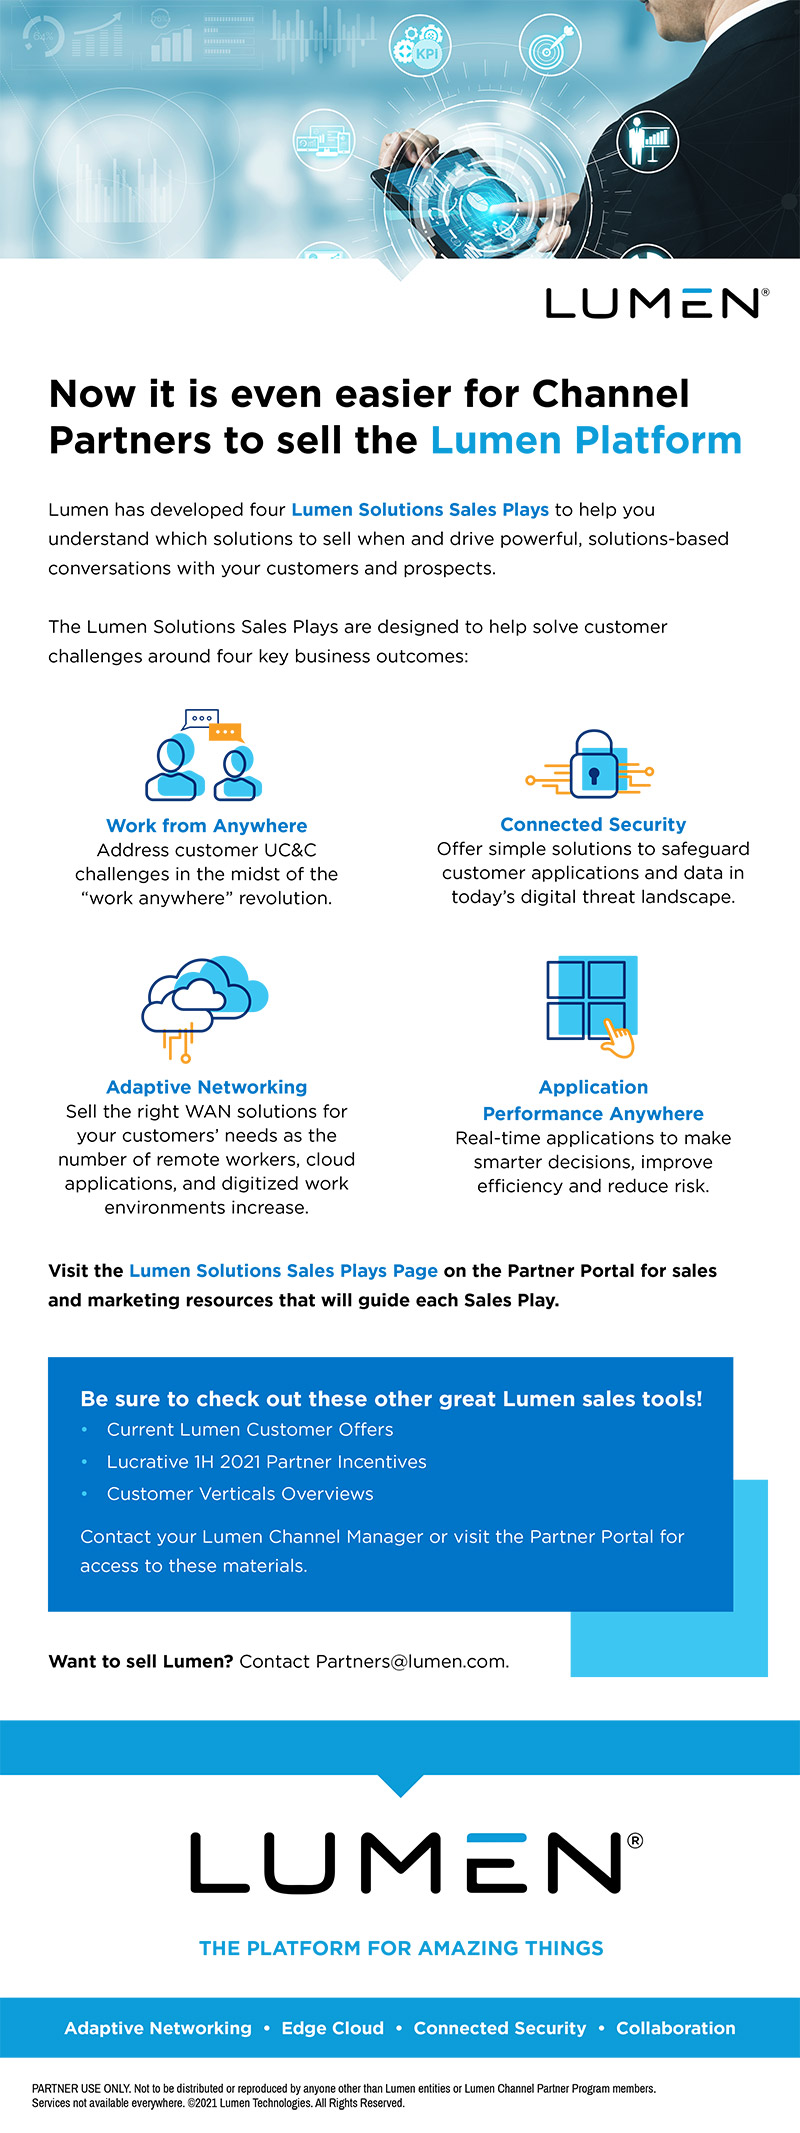 Now it is even easier for Channel Partners to sell the Lumen Platform